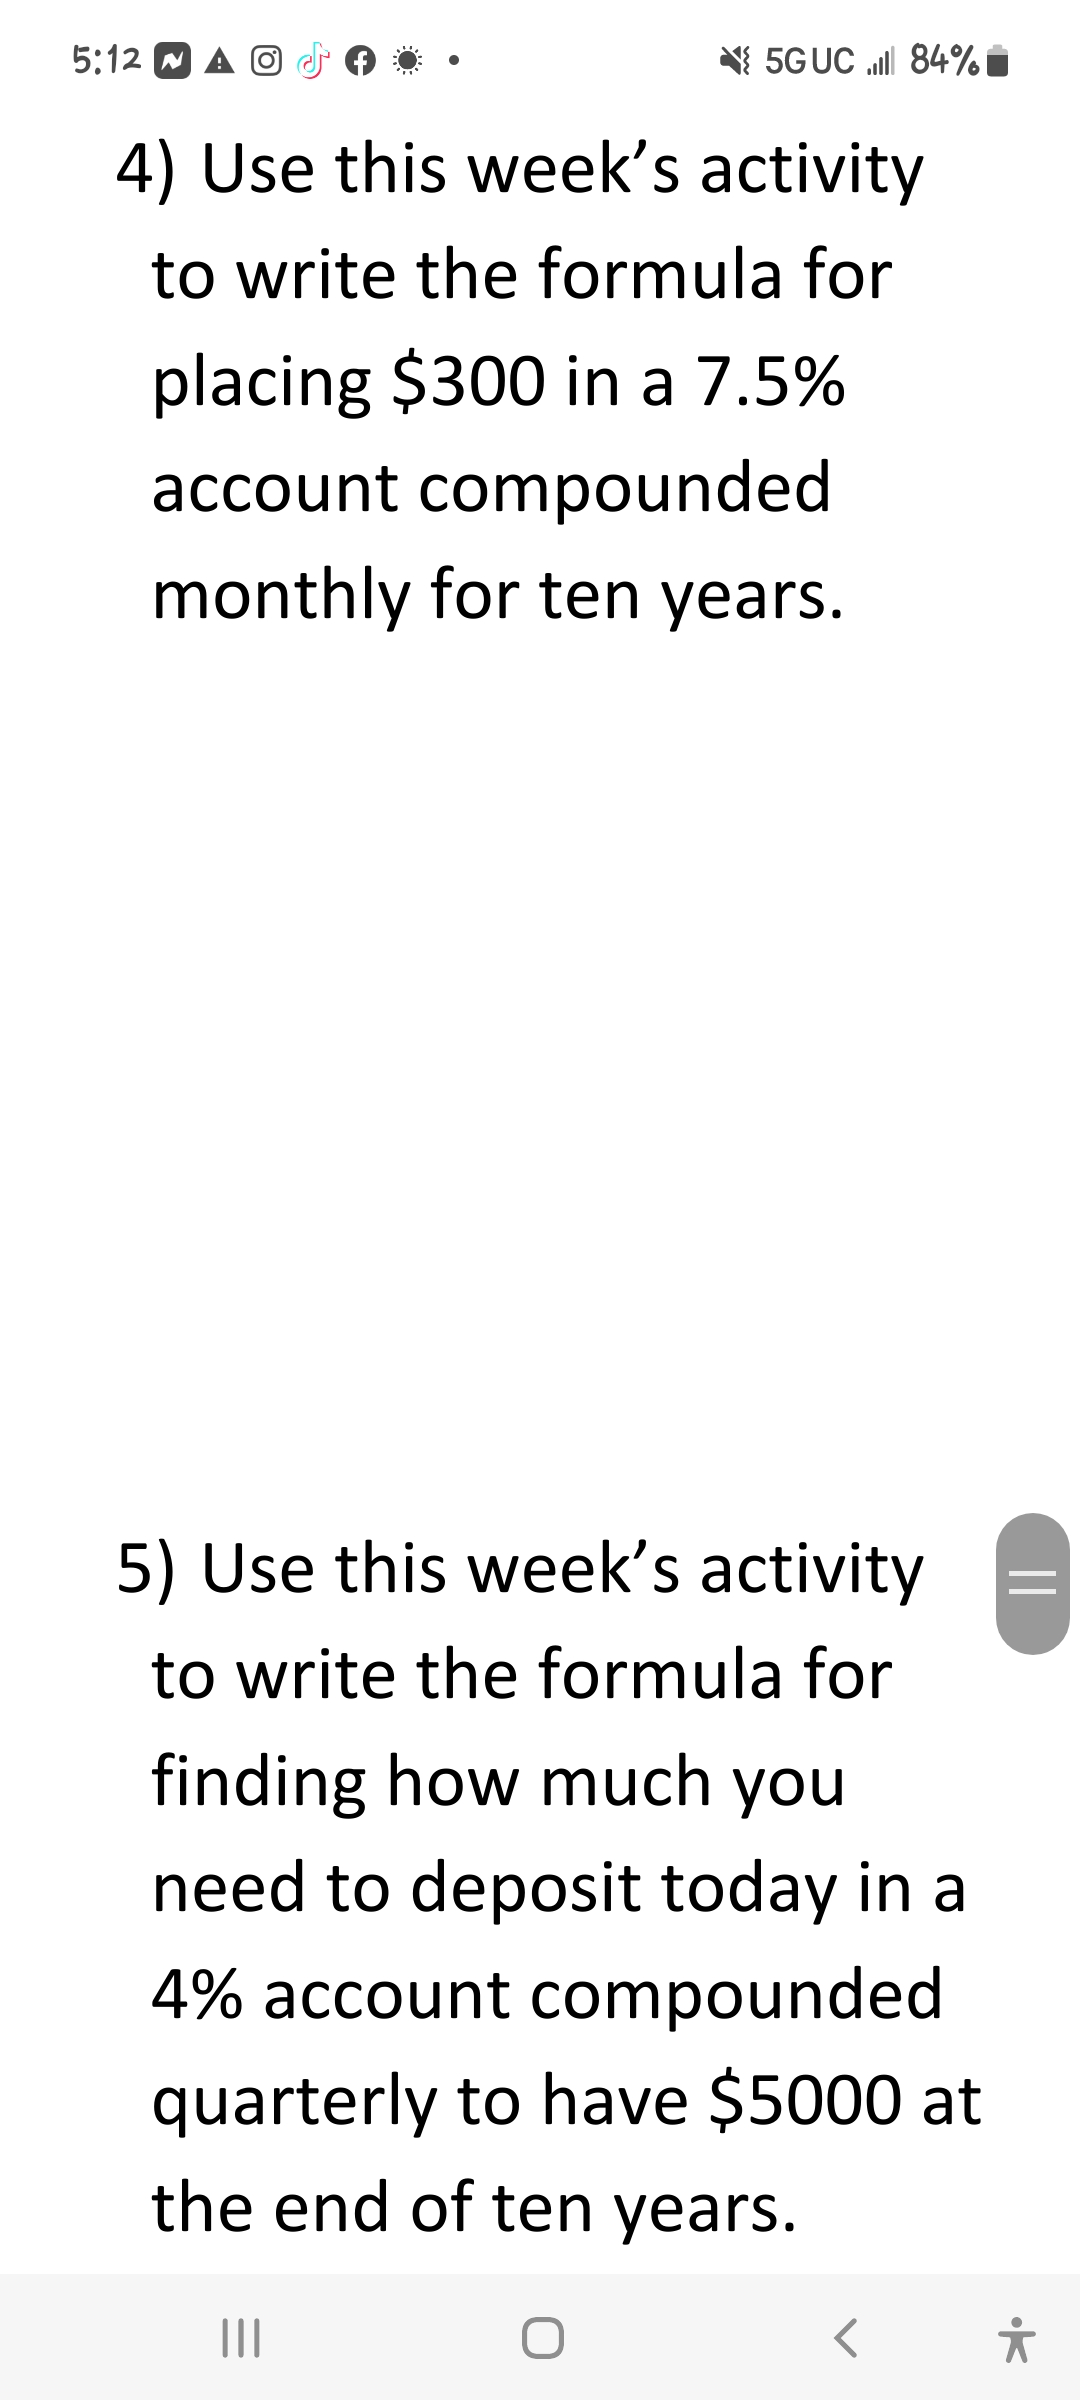 5:12 A O
5G UC 84%
4) Use this week's activity
to write the formula for
placing $300 in a 7.5%
account compounded
monthly for ten years.
5) Use this week's activity
to write the formula for
finding how much you
need to deposit today in a
4% account compounded
quarterly to have $5000 at
the end of ten years.
O
|||
||
유